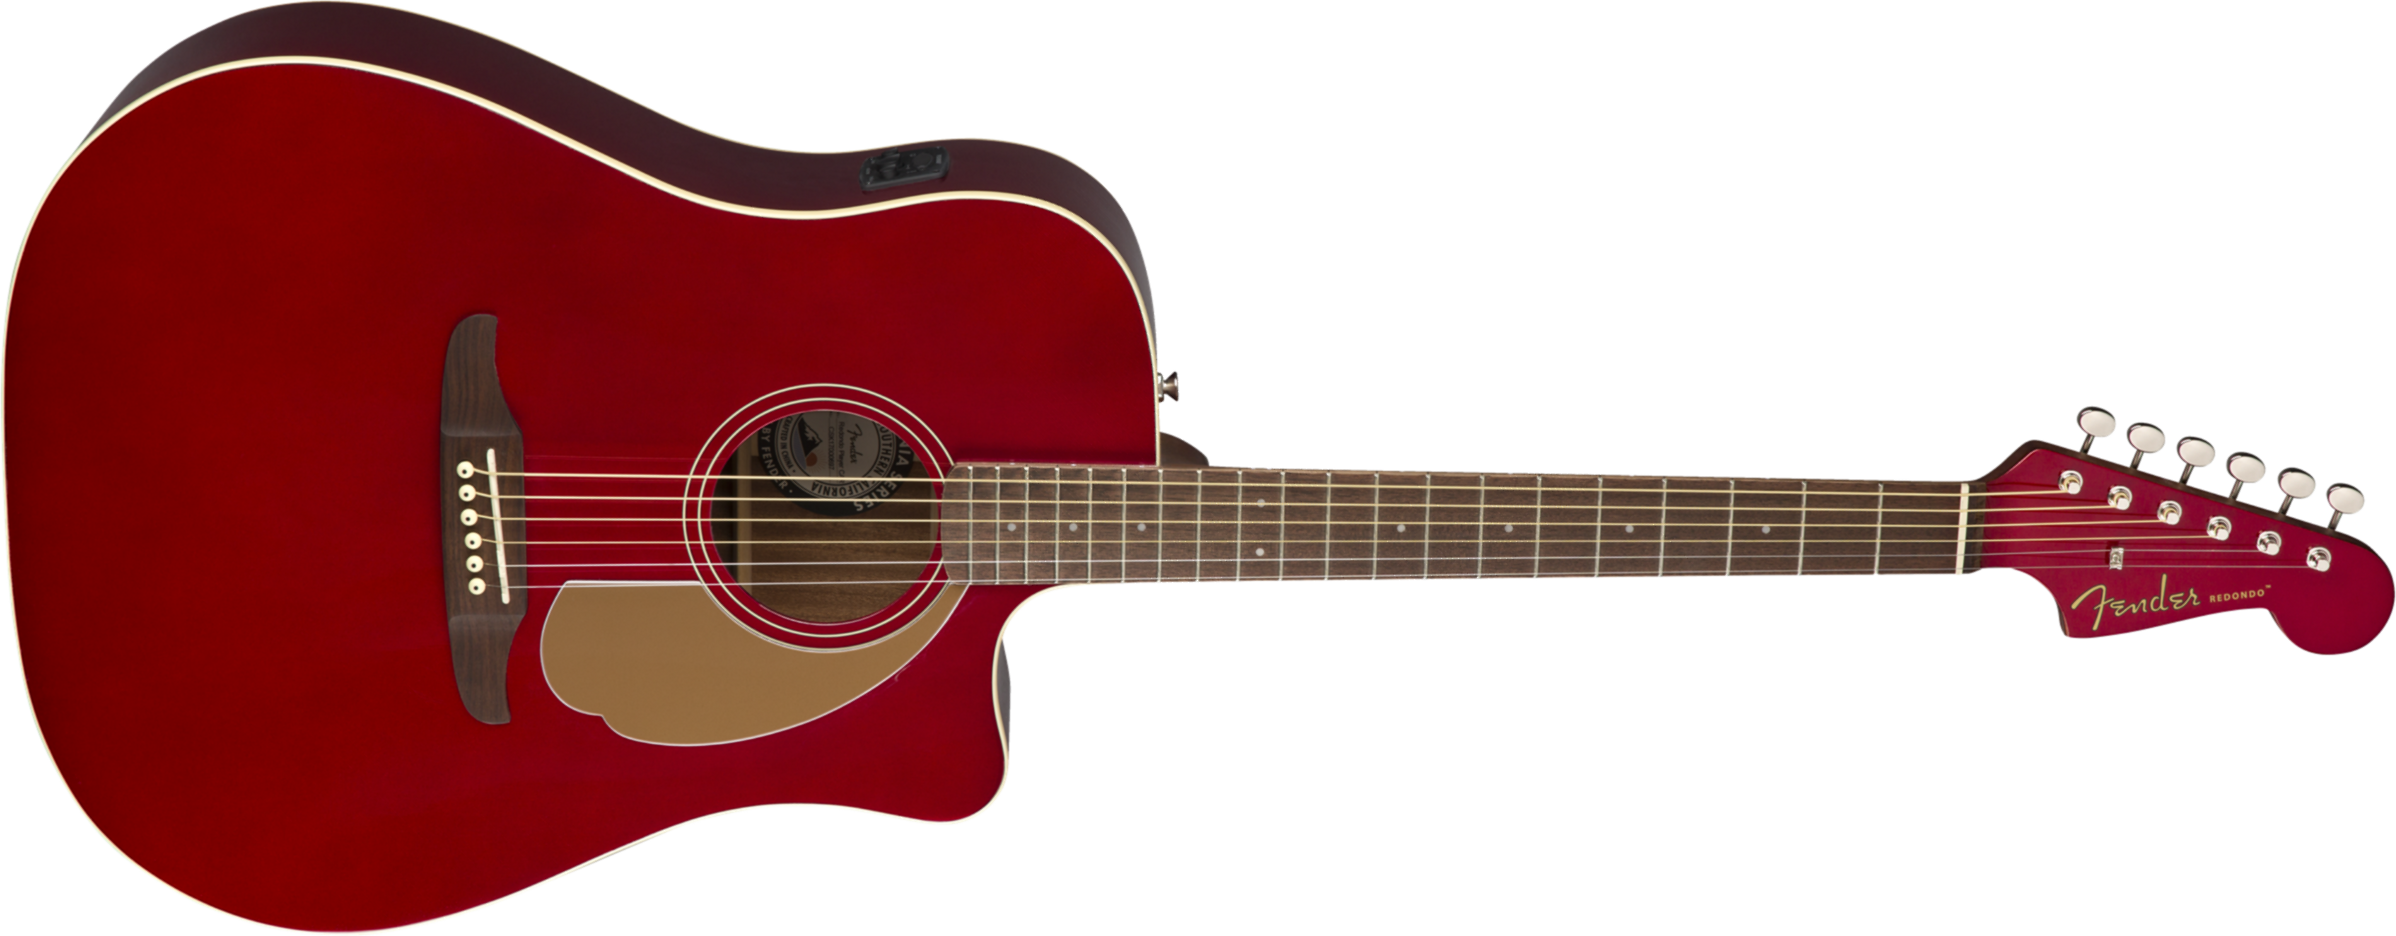 Fender Redondo Player - Candy Apple Red - Acoustic guitar & electro - Main picture